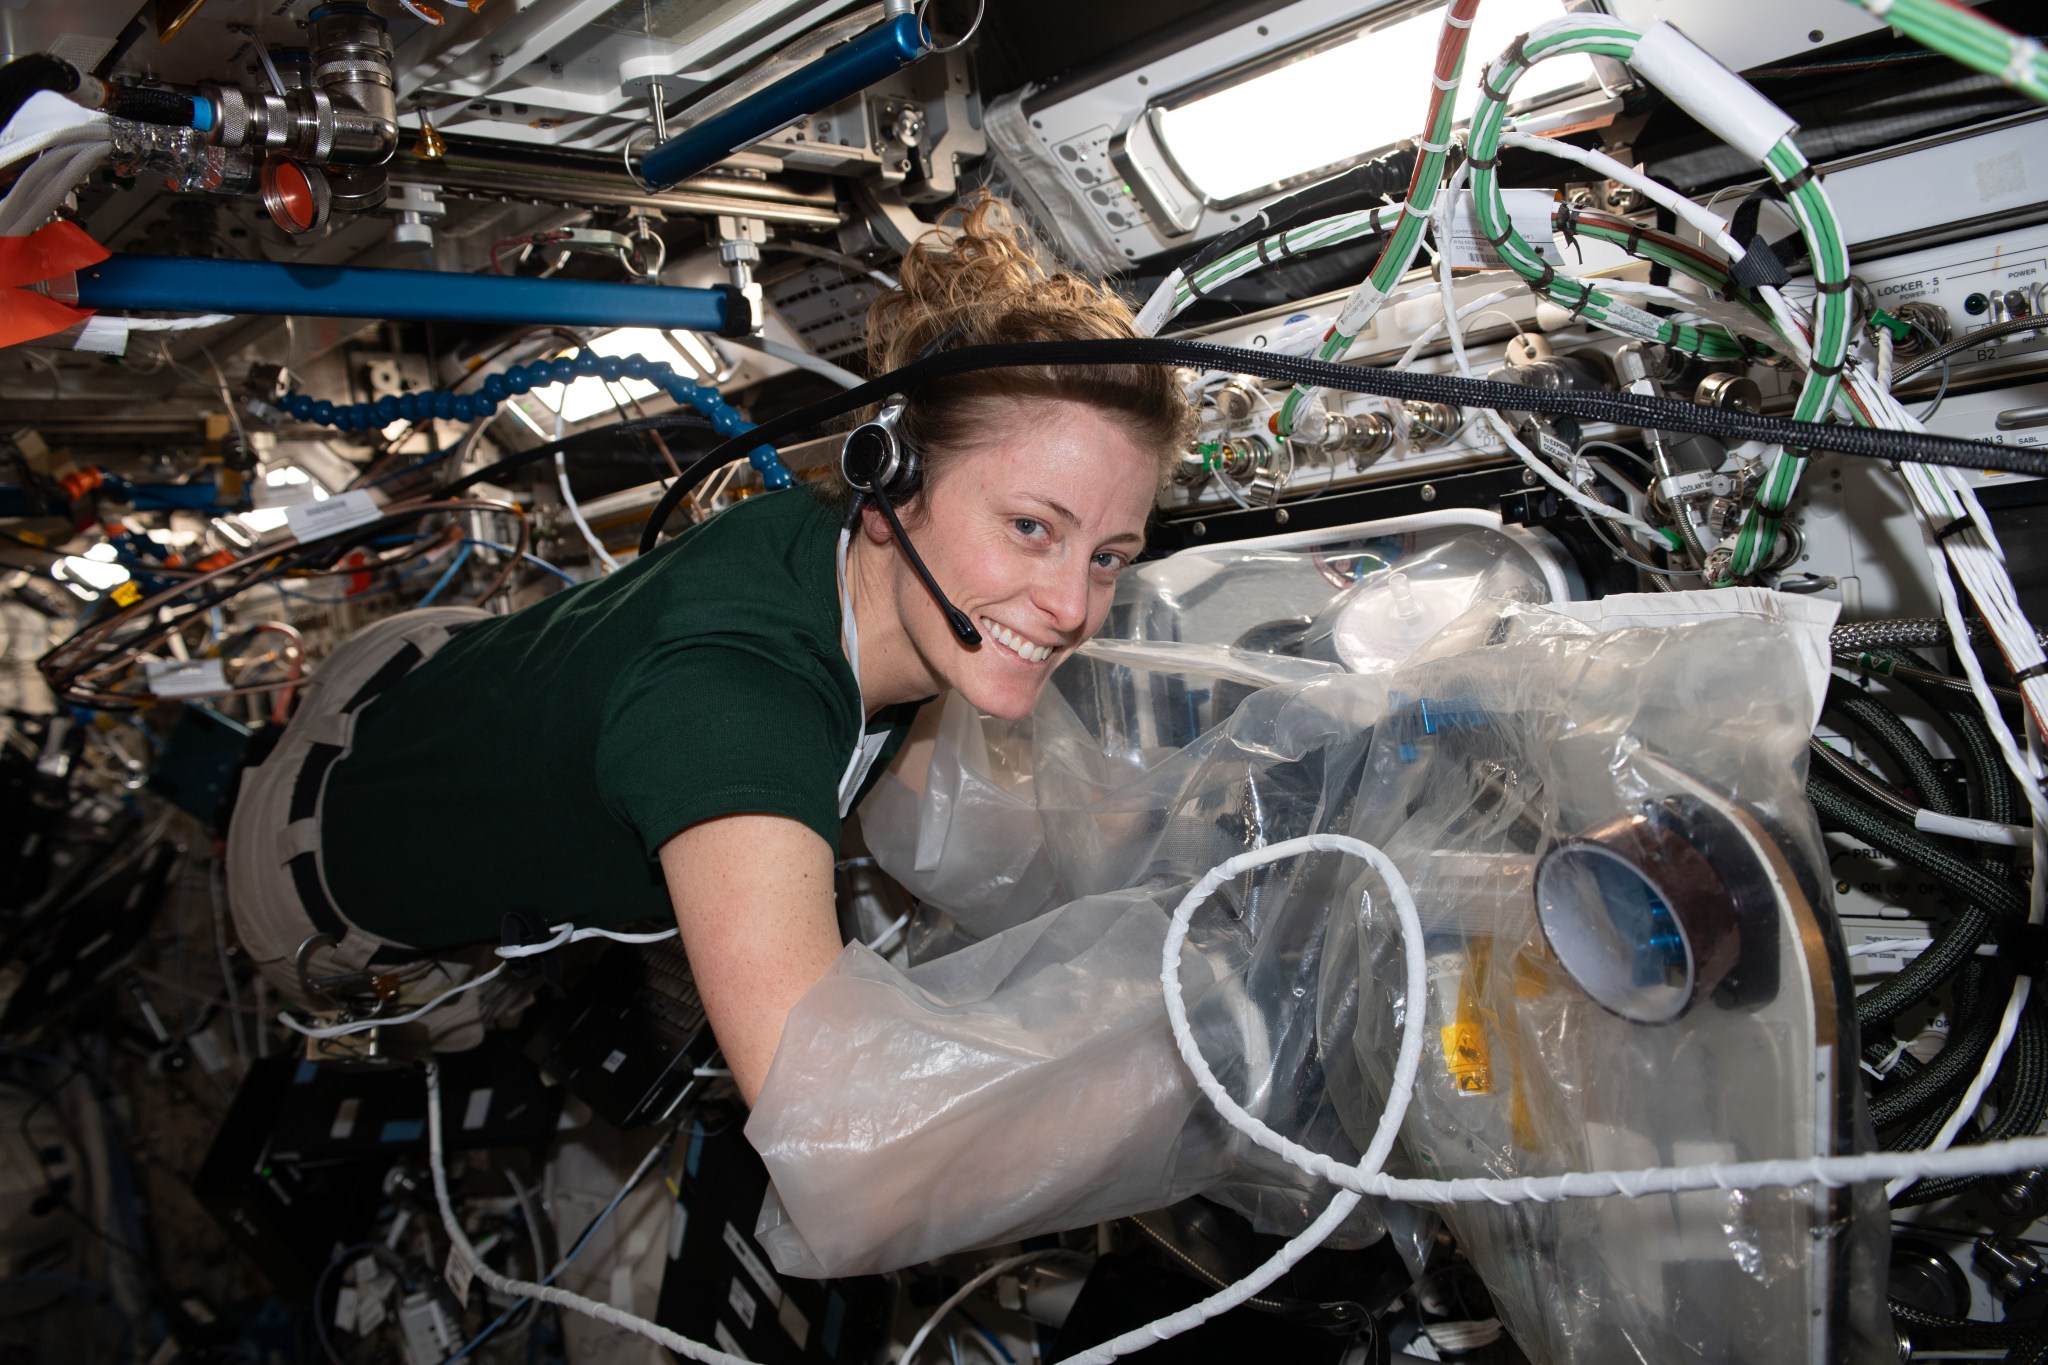 O’Hara is floating horizontally, smiling at the camera, her arms inside plastic sleeves of the BioFabrication Facility, which is connected to the wall to her right. She is wearing a green t-shirt and khaki pants and has a headset on. Several cords float in front of her.